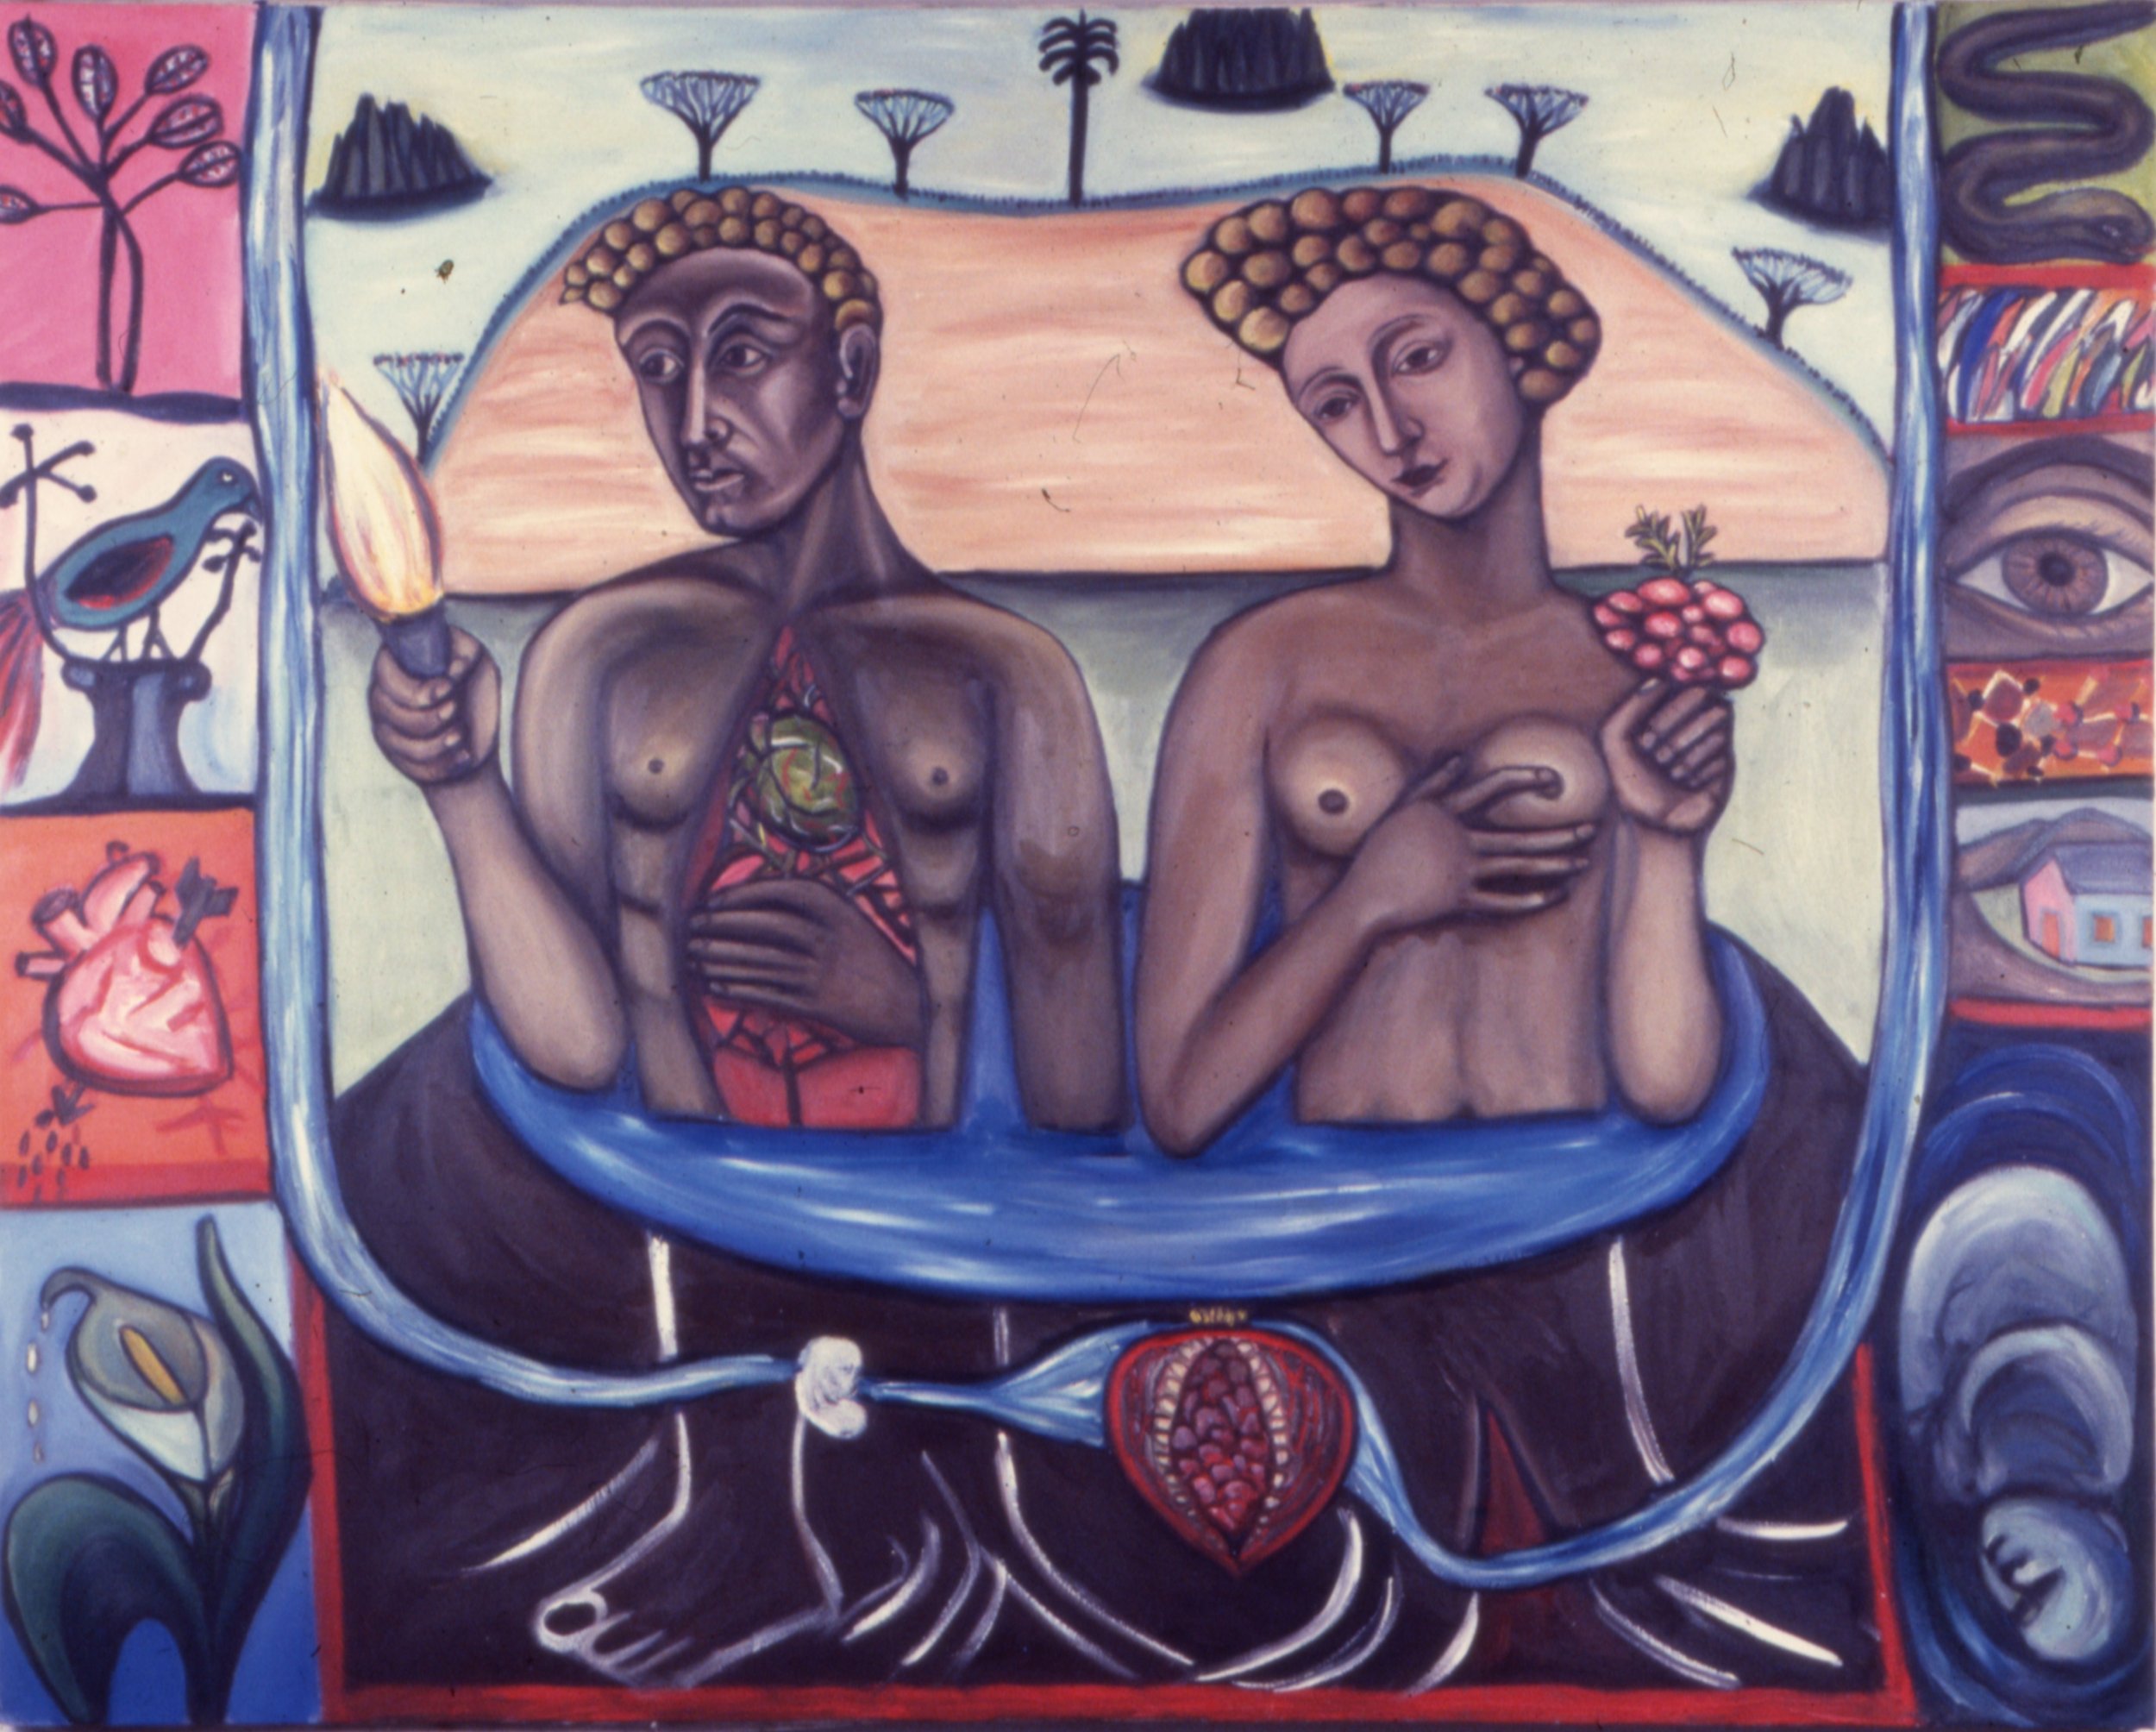 We all Bath in the Pool of Water, 1994, Acrylic on Canvas 62" x 72", 